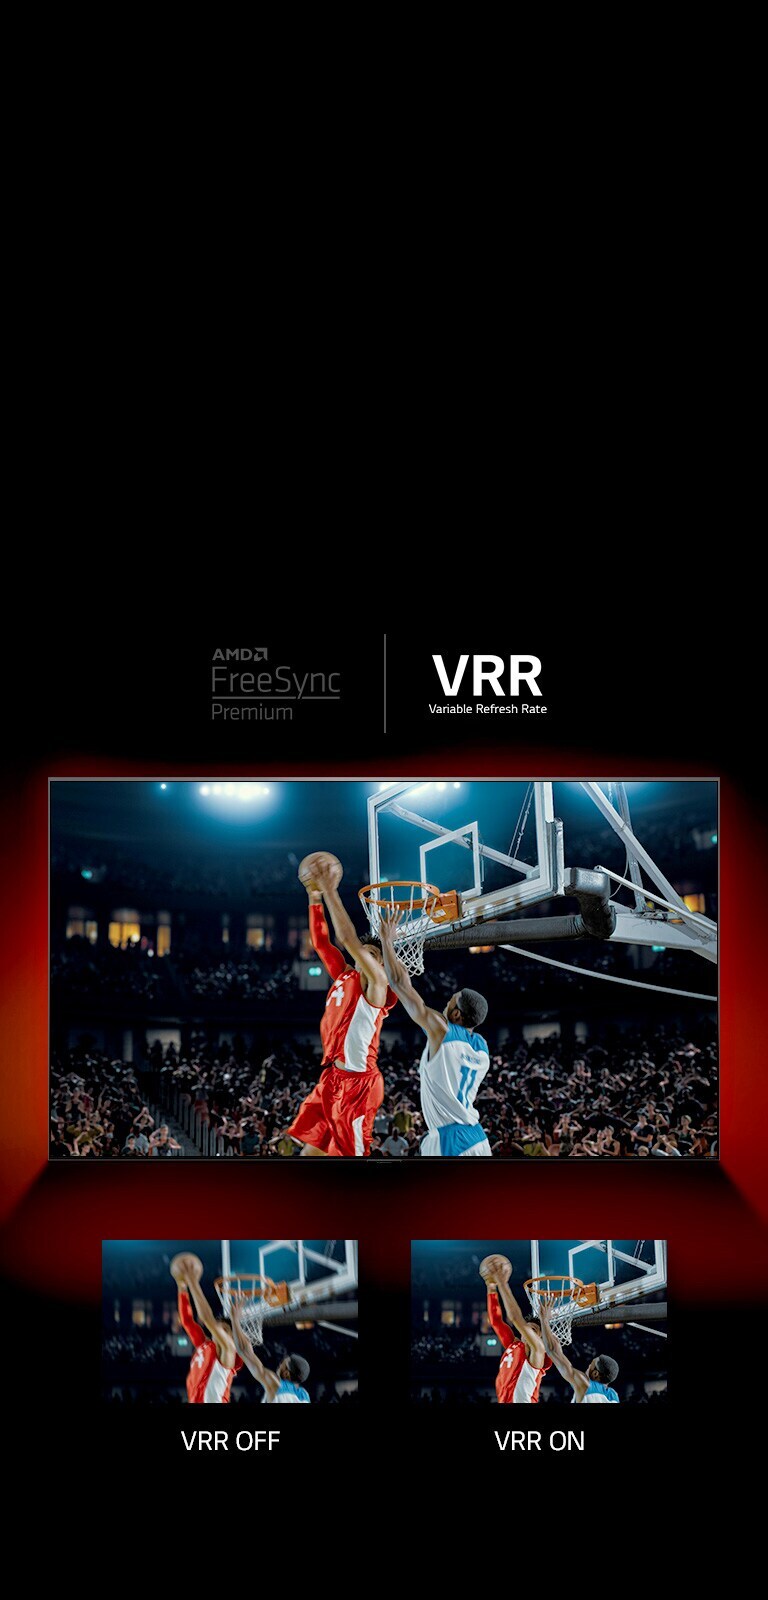 There is QNED TV standing in front of red wall – inscreen image shows a basketball game with two players playing game. Right below, there are two boxes of image. On left says VRR OFF and shows a blurry image of the same image and on the right says VRR ON and shows the same image.